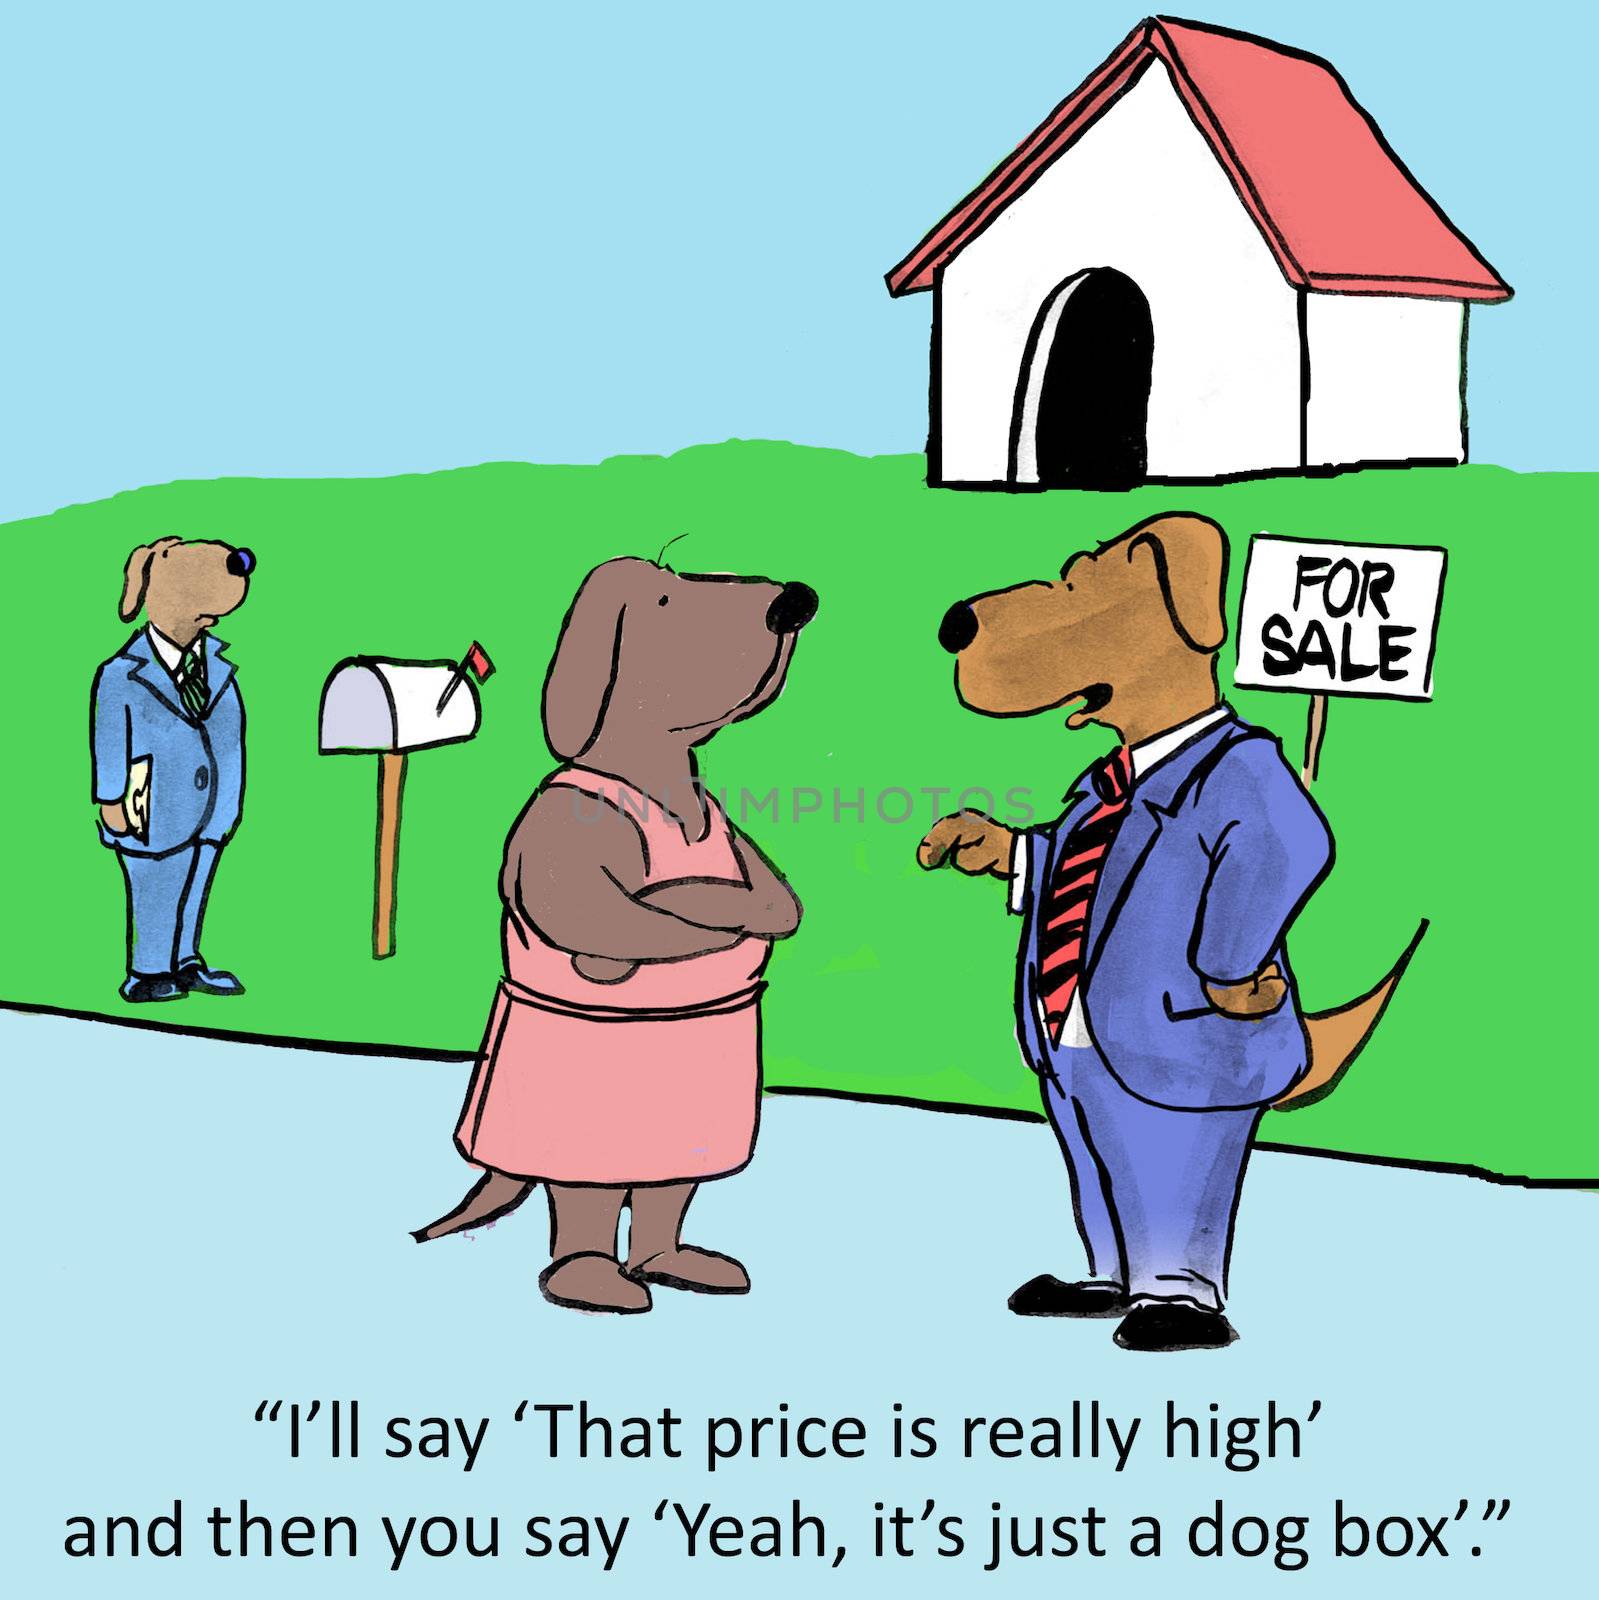 "I'll say 'That price is really high' and then you say 'Yeah, it's just a dog box'."